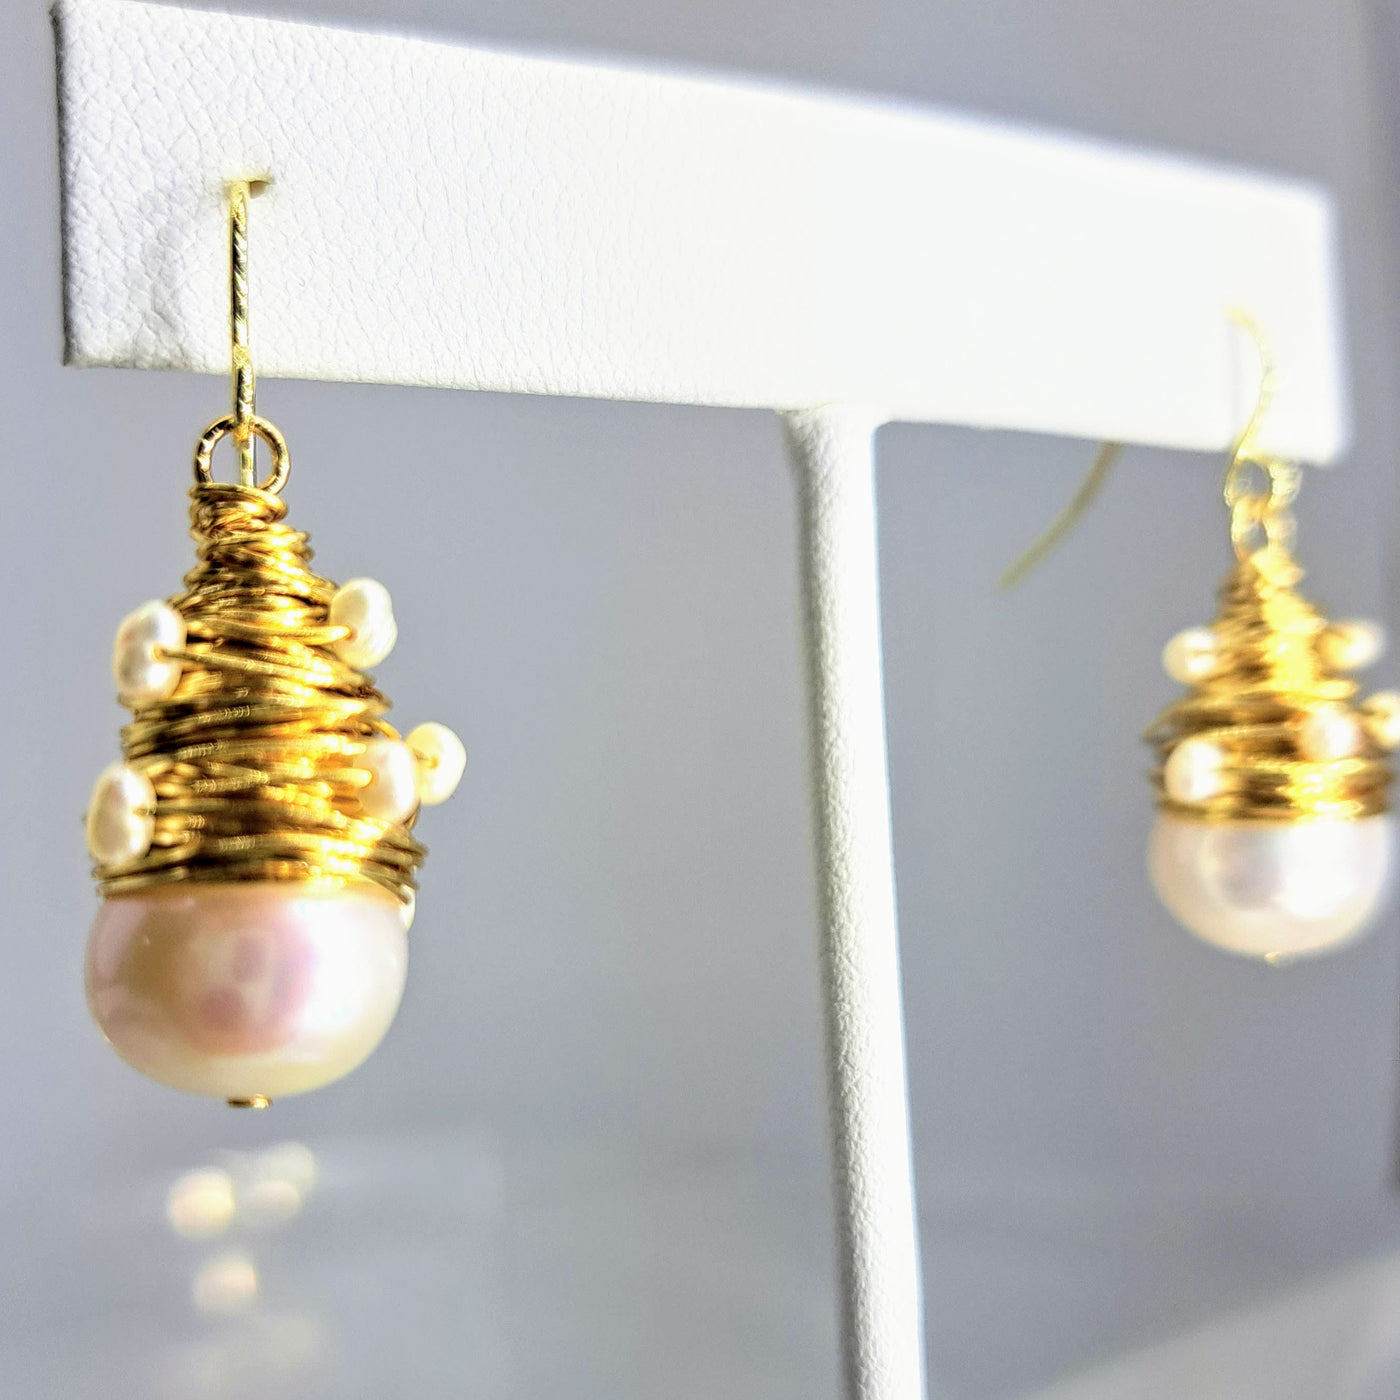 "Bird's Nest" 1.5" Earrings - White Pearl, Gold-filled, wire-wrapped, gold sterling French Hook